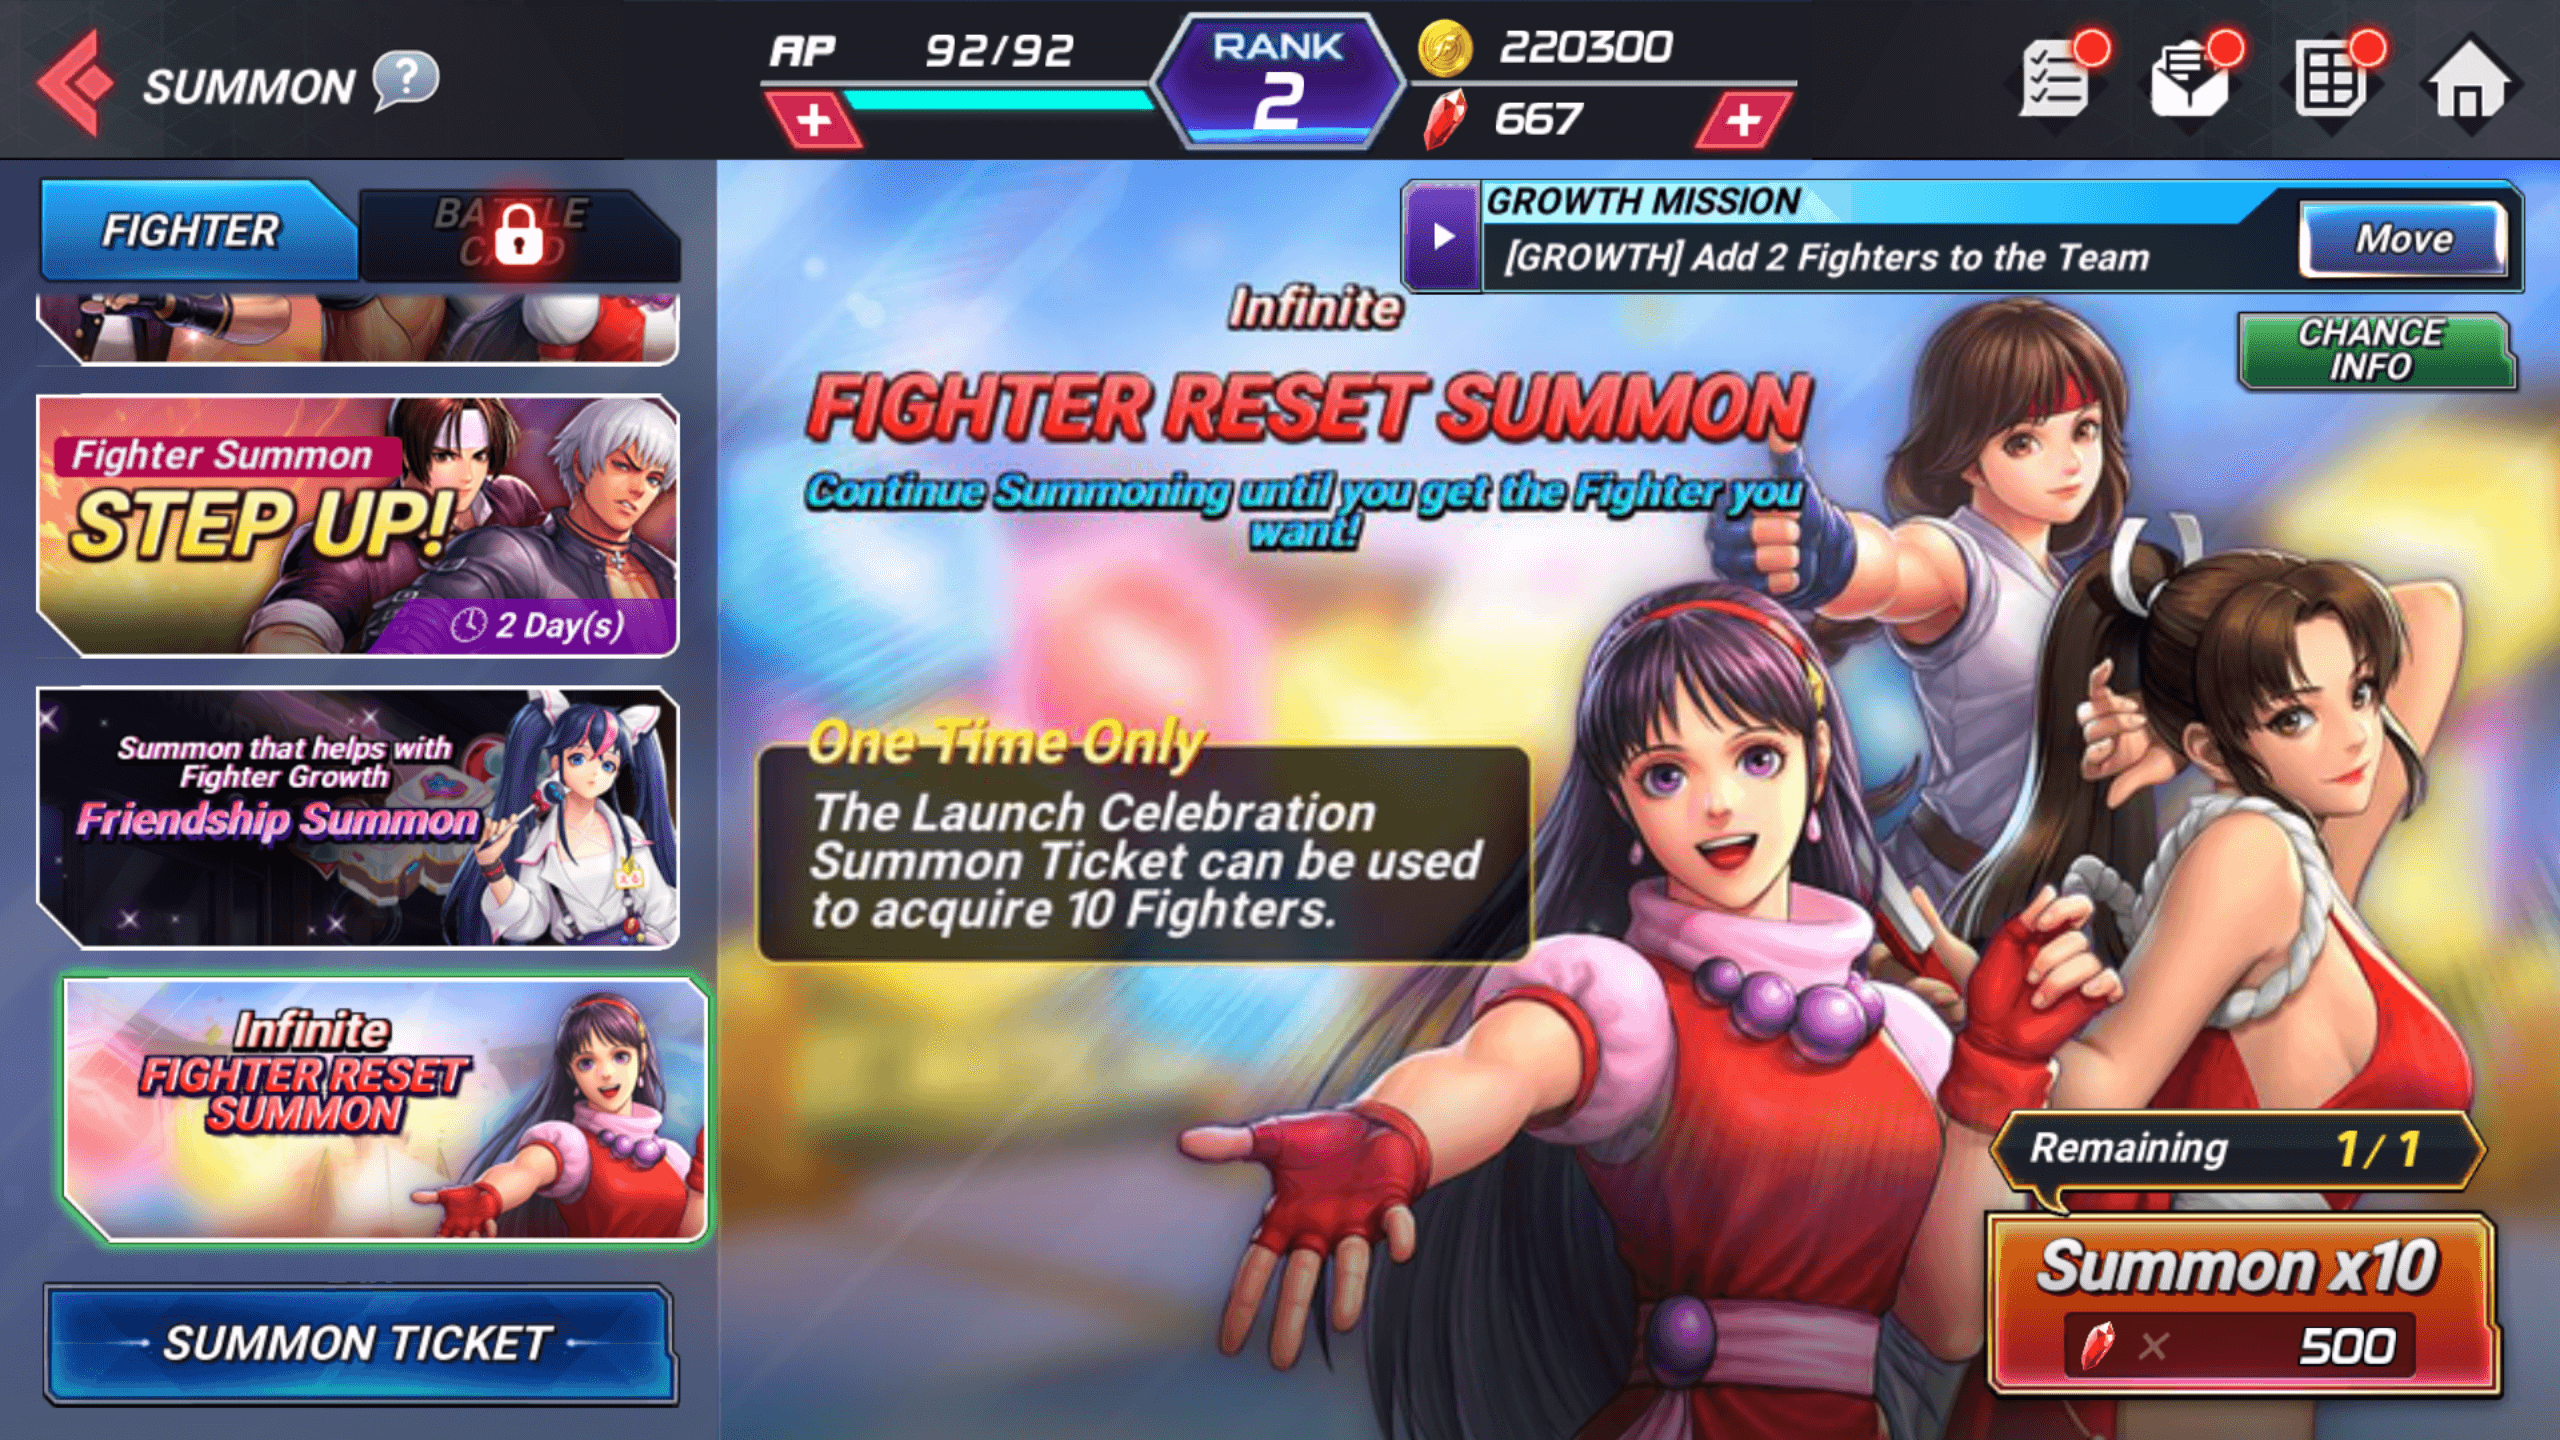 The King of Fighters: ALLSTAR Summon Menu